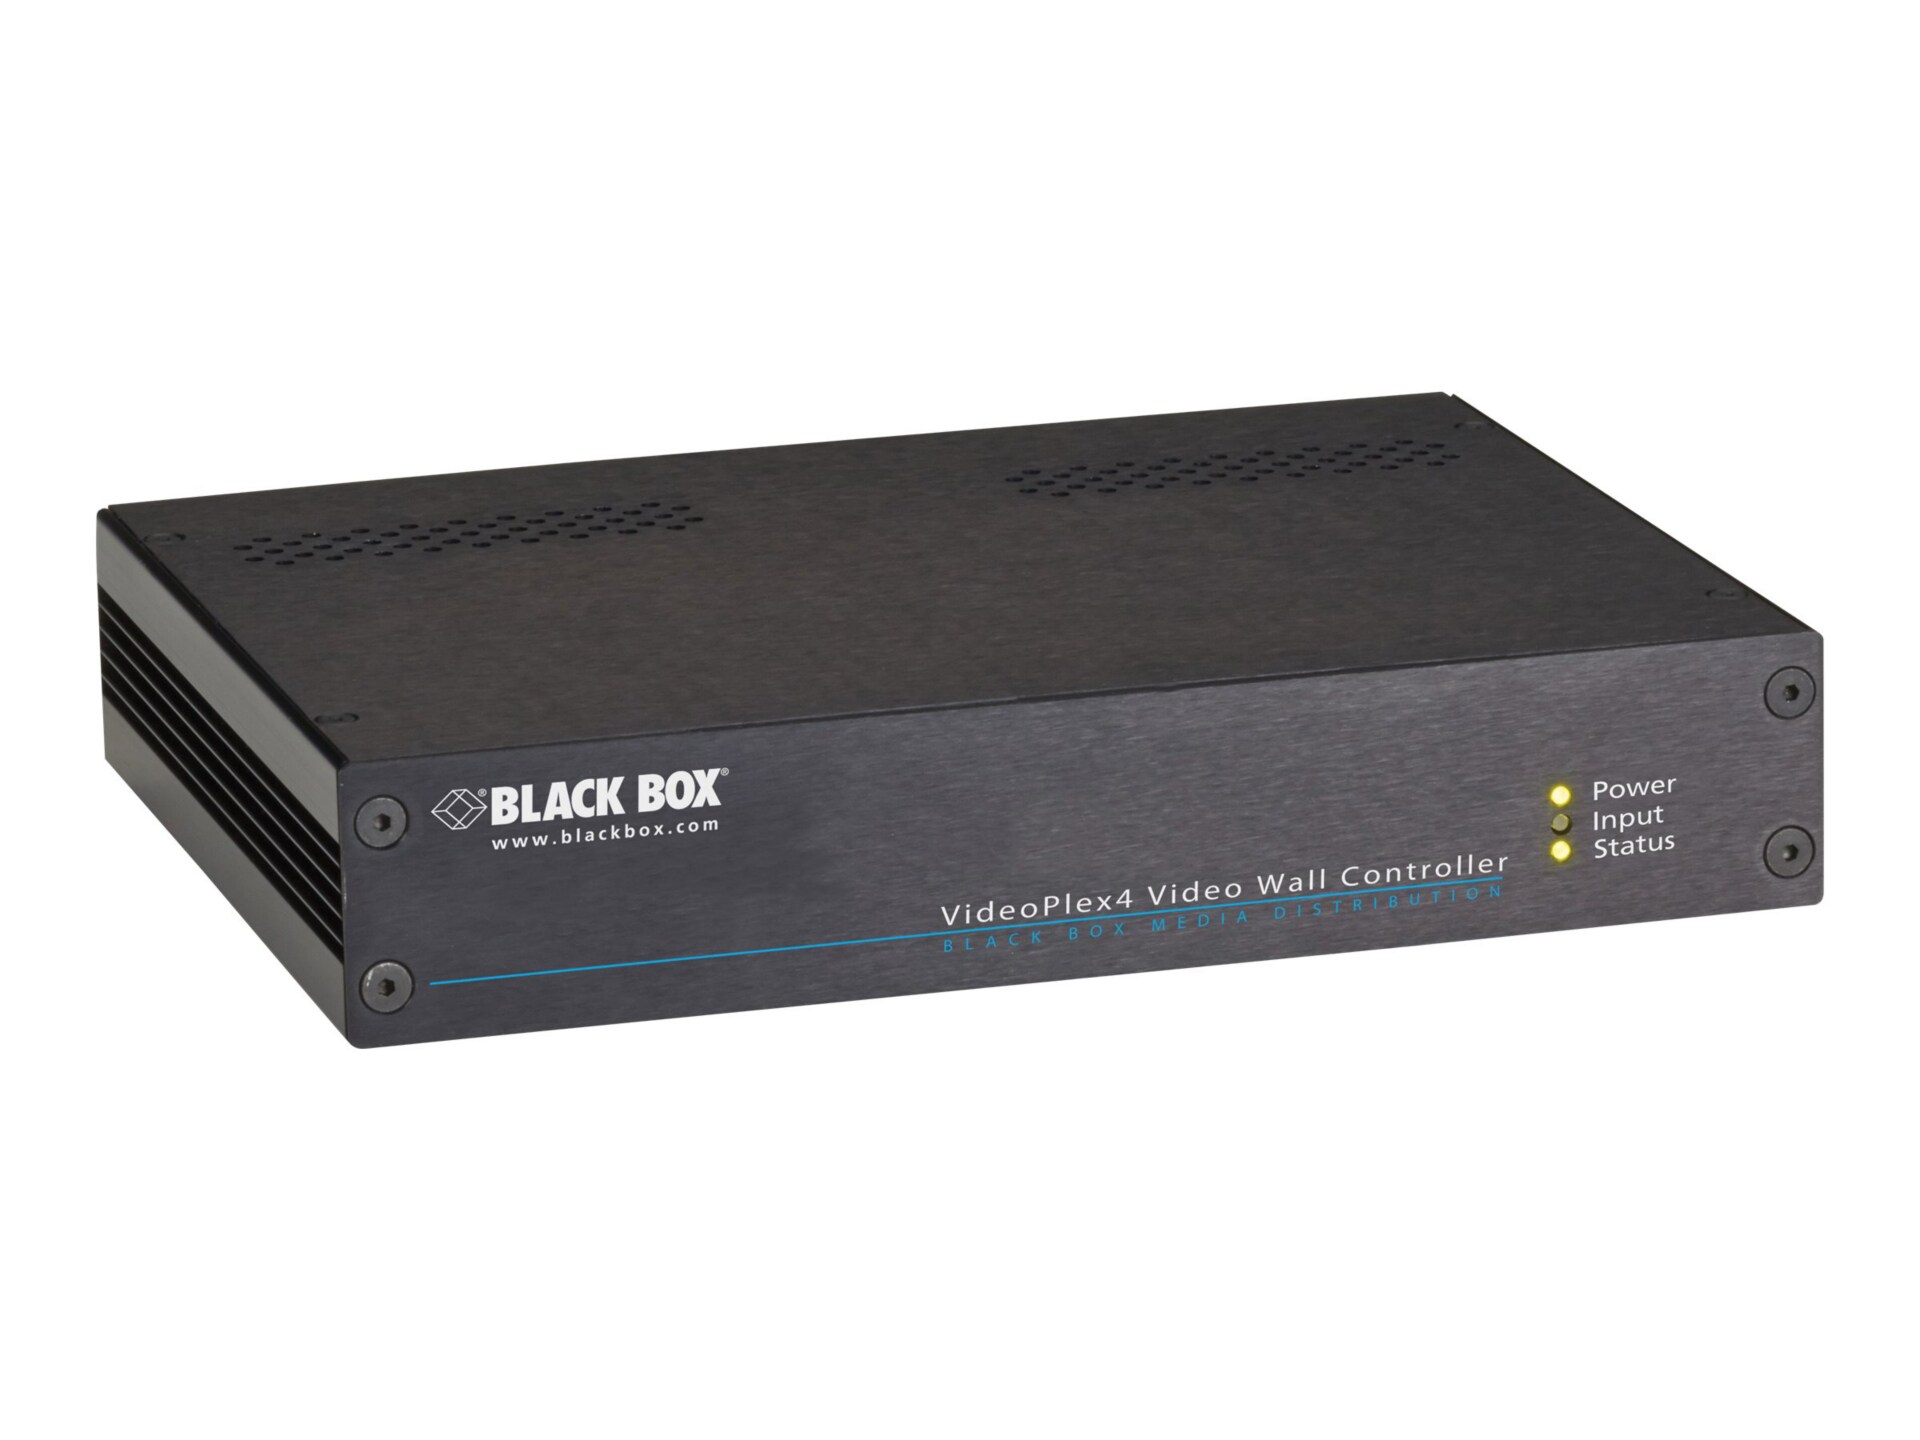 Black Box Requires The X Window System Libraries And Headers For Sale